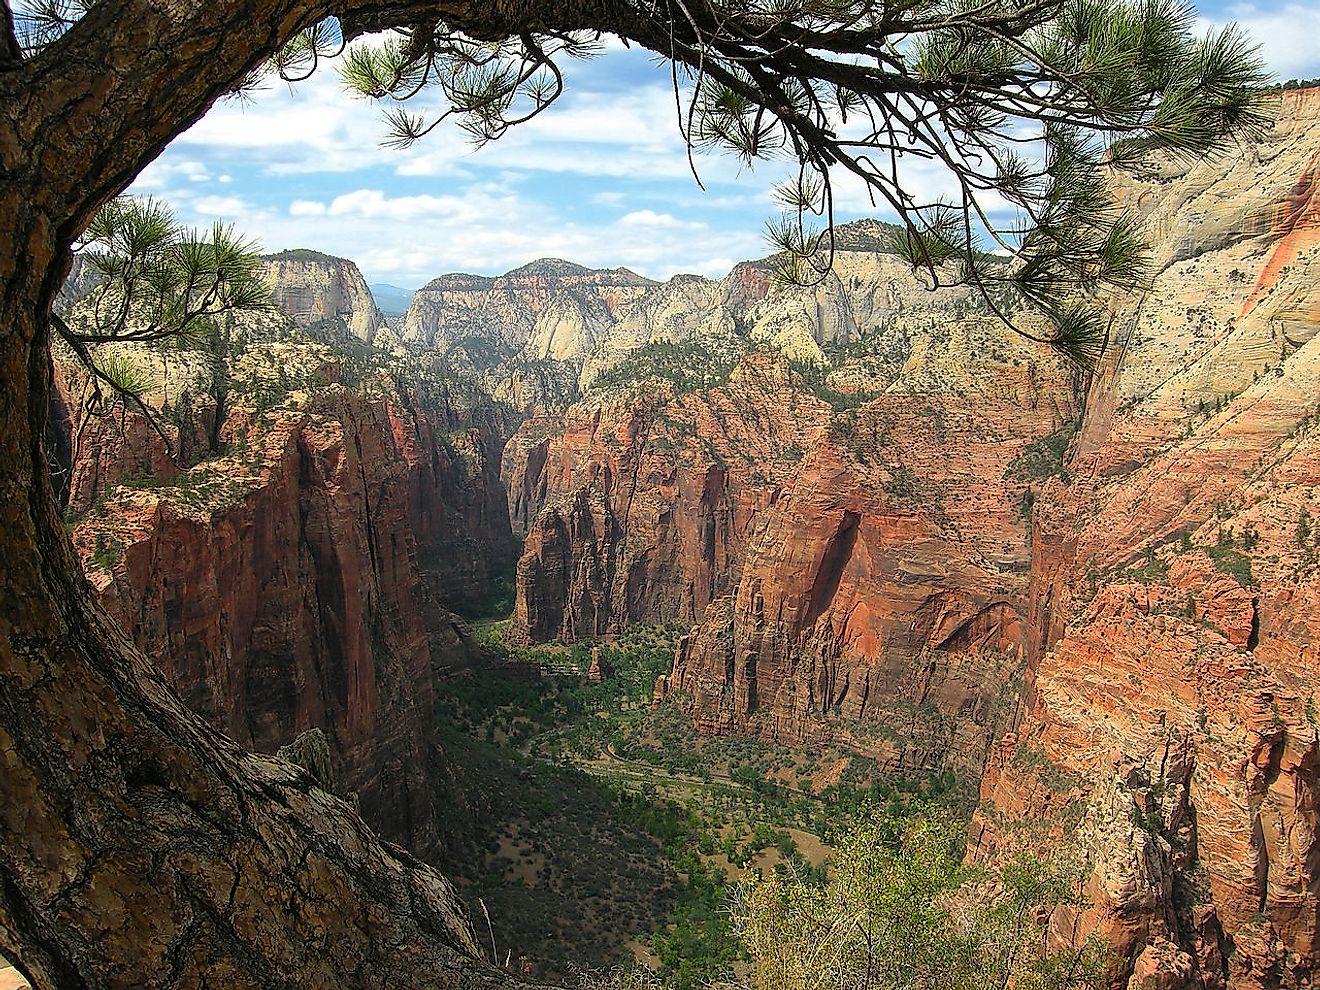 Breathtaking view from the Angels Landing trail looking northward to the Narrows, Zion National Park, Utah, USA. Image credit: Tobias Alt/Wikimedia.org